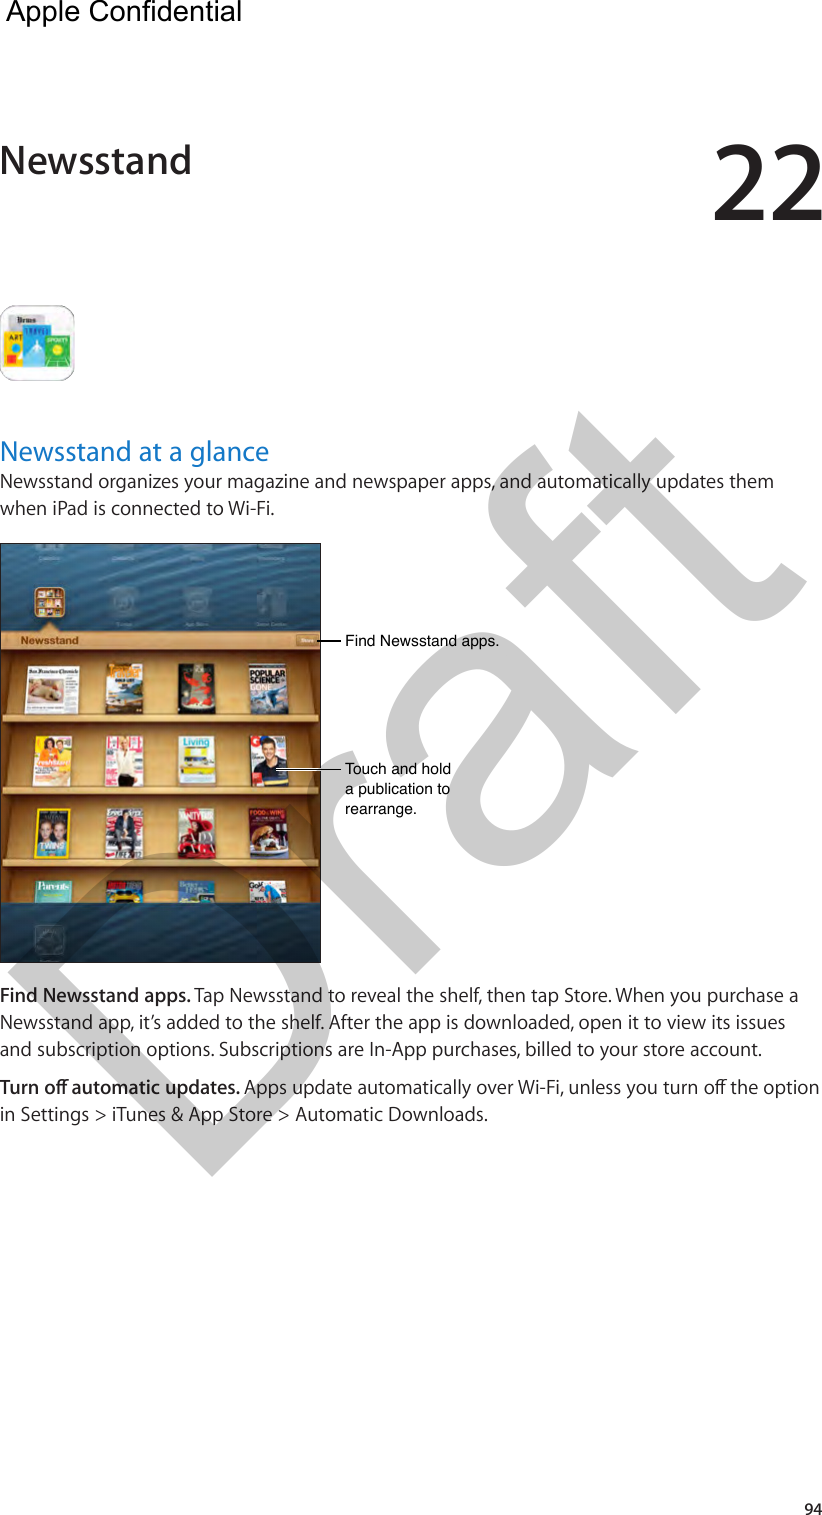 2294Newsstand at a glanceNewsstand organizes your magazine and newspaper apps, and automatically updates them when iPad is connected to Wi-Fi.Find Newsstand apps.Find Newsstand apps.Touch and hold a publication to rearrange.Touch and hold a publication to rearrange.Find Newsstand apps. Tap Newsstand to reveal the shelf, then tap Store. When you purchase a Newsstand app, it’s added to the shelf. After the app is downloaded, open it to view its issues and subscription options. Subscriptions are In-App purchases, billed to your store account.in Settings &gt; iTunes &amp; App Store &gt; Automatic Downloads.Newsstand  Apple Confidential Draft